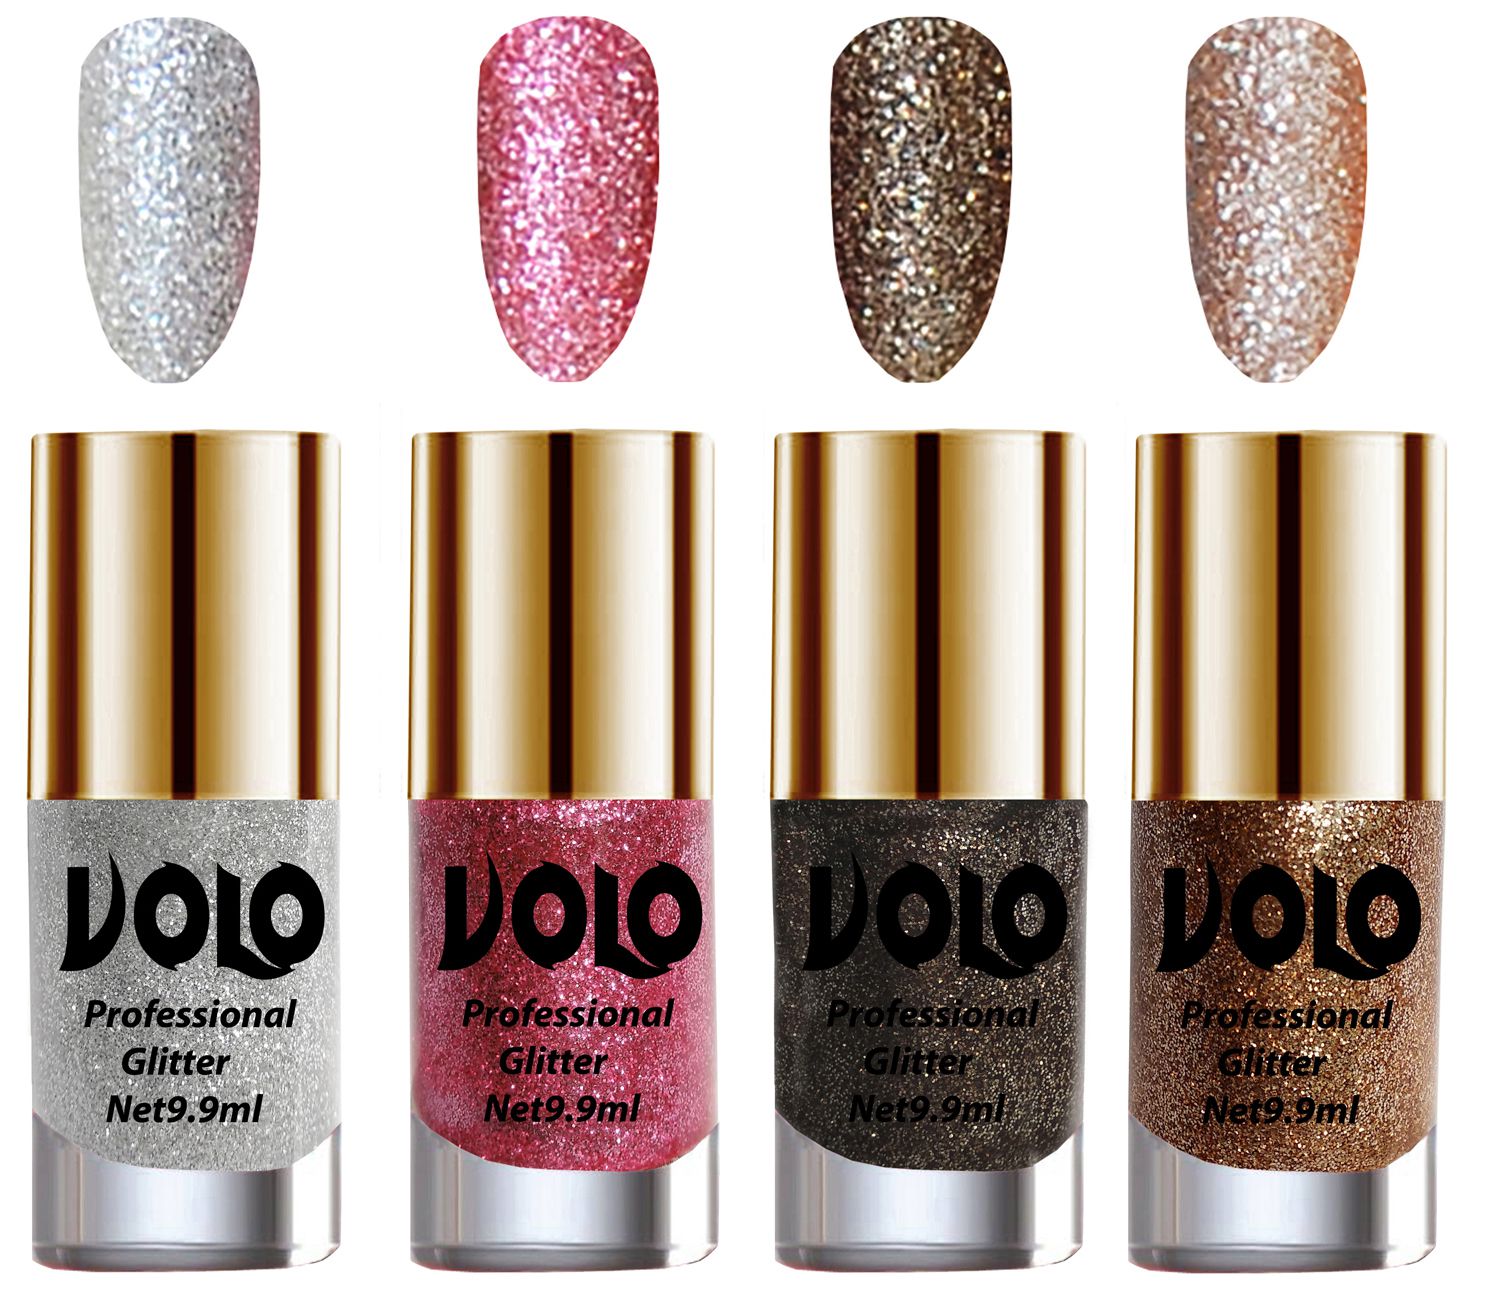     			VOLO Professionally Used Glitter Shine Nail Polish Silver,Pink,Grey Gold Pack of 4 39 mL